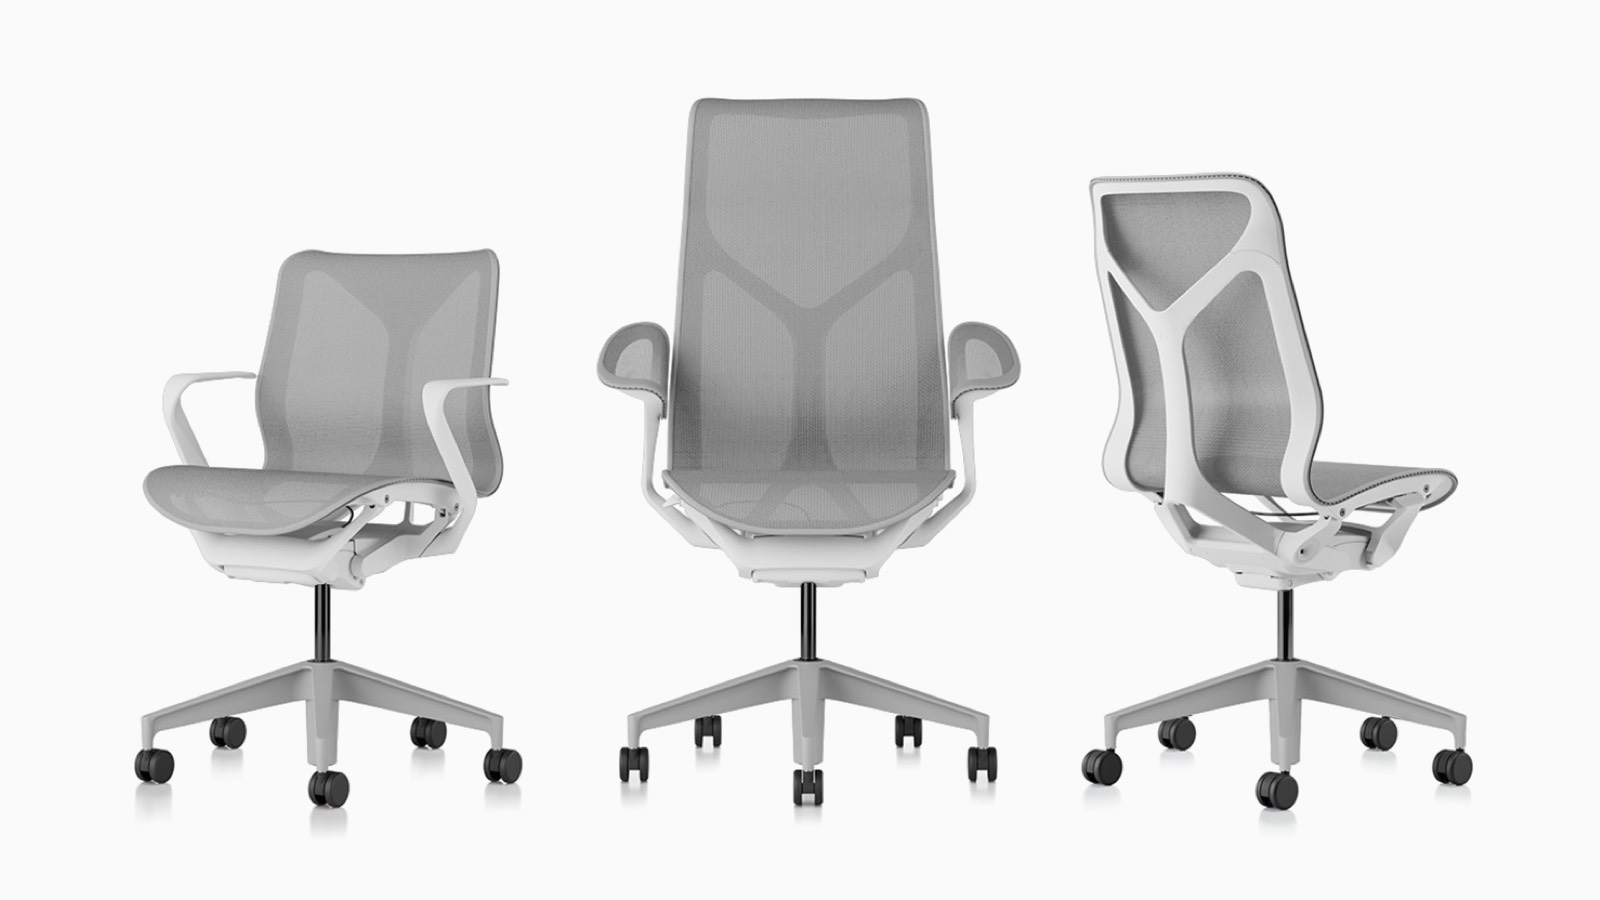 Low-back, high-back, and mid-back Cosm ergonomic desk chairs with bases and frames in Studio White and suspension materials in Mineral light gray.